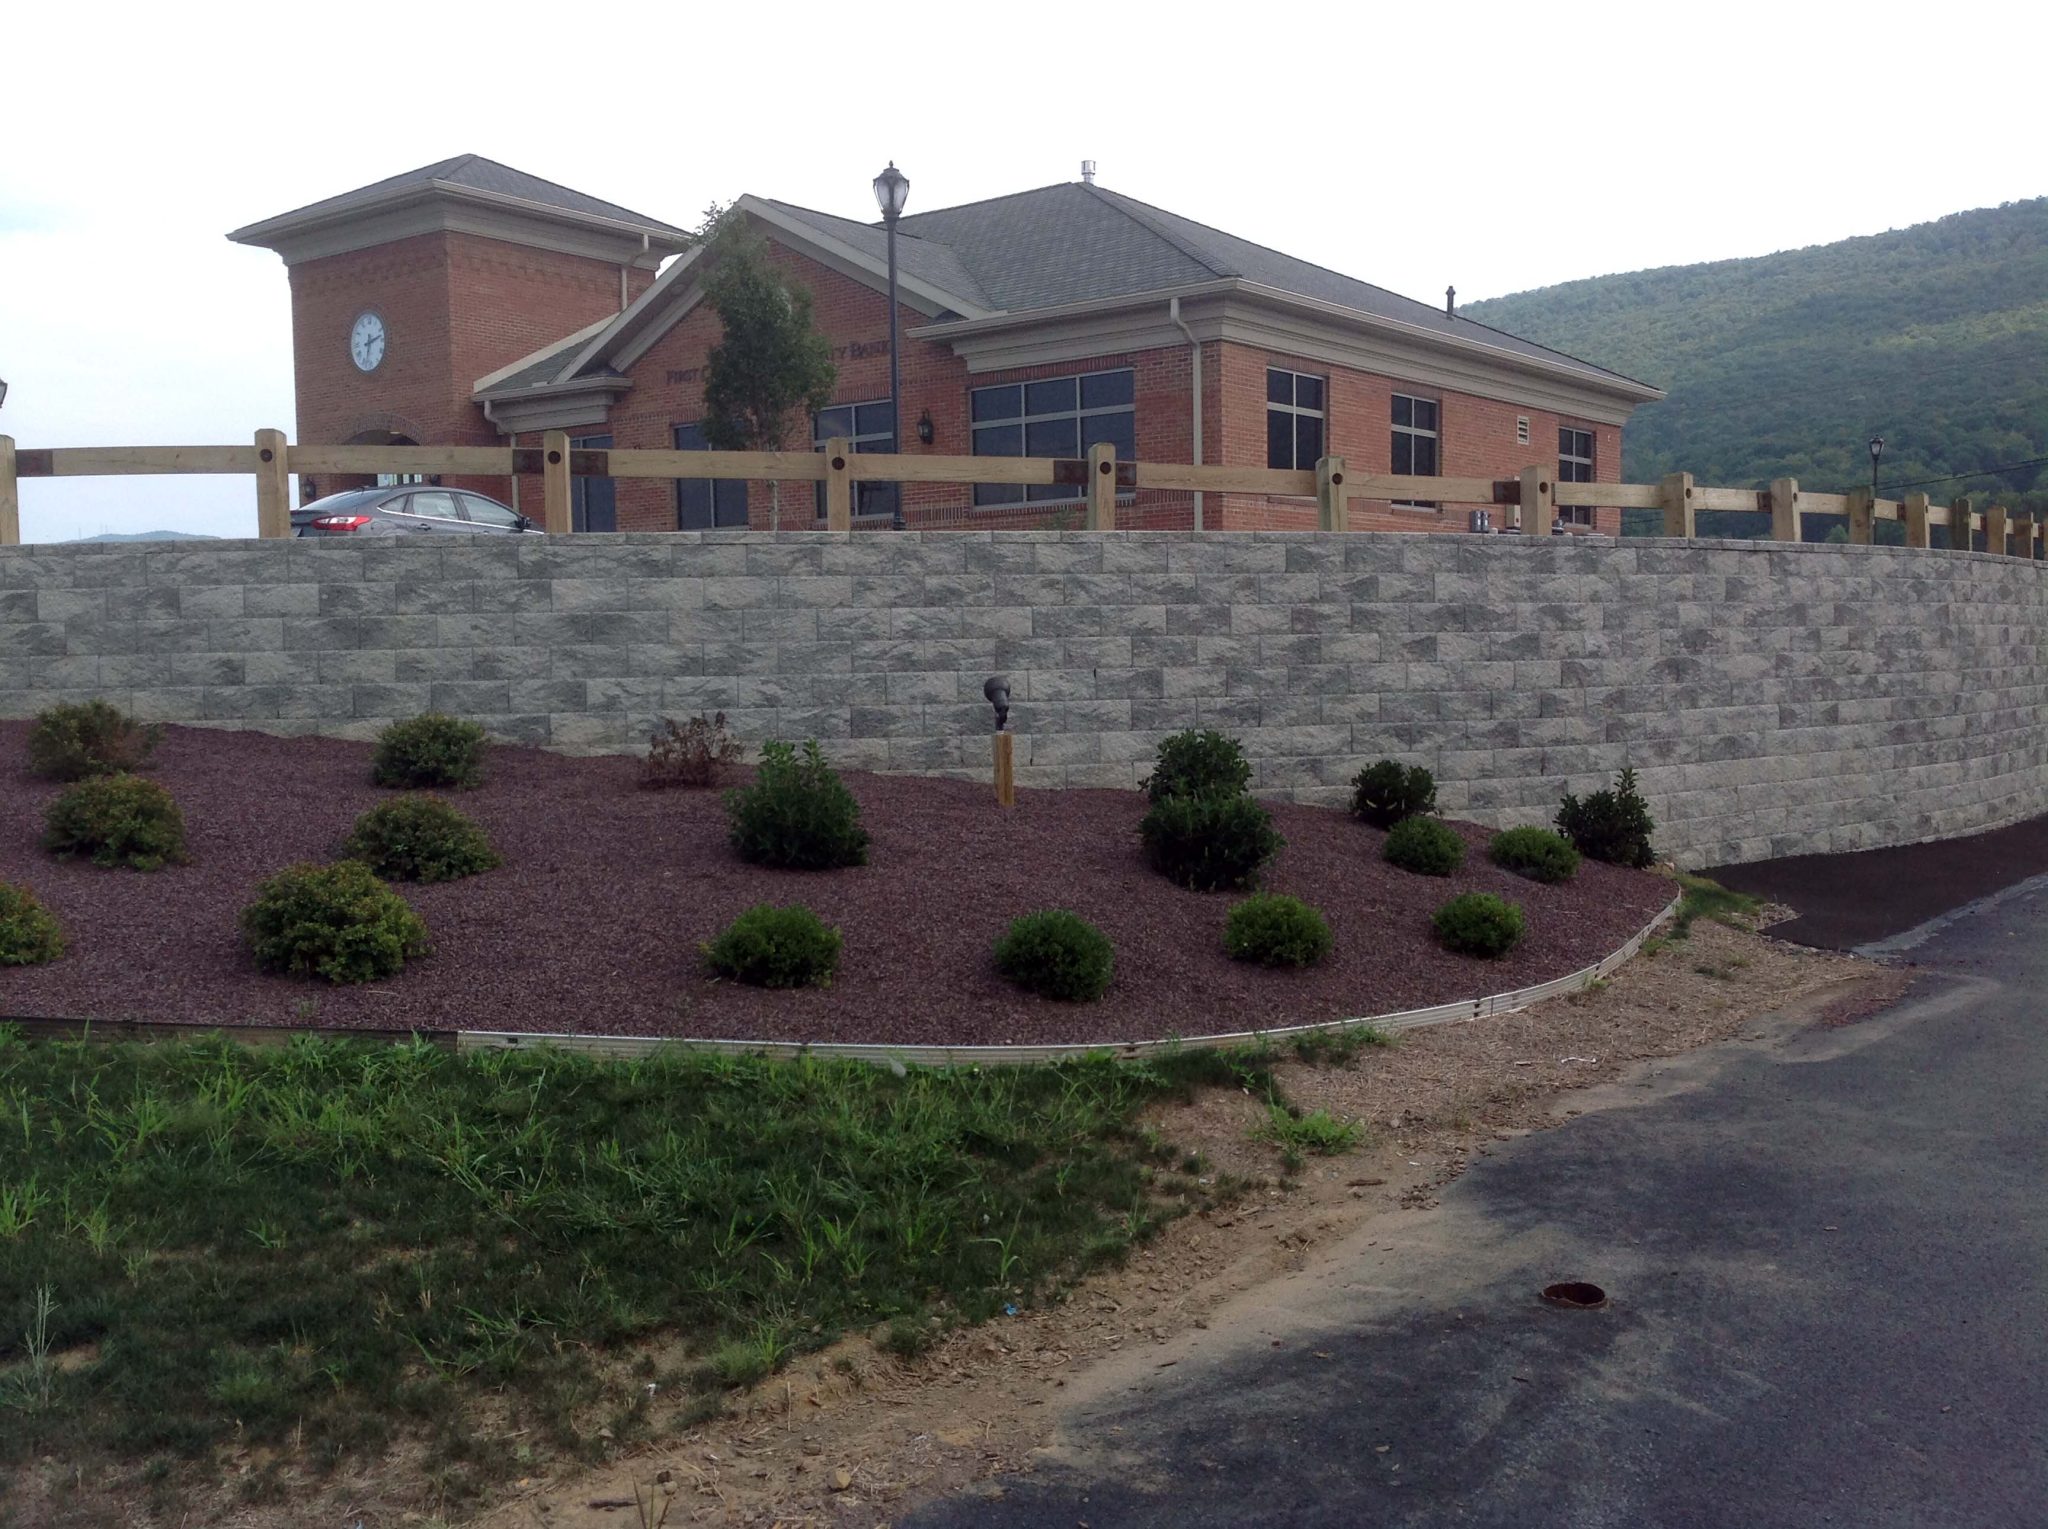 CornerStone 100 Retaining wall for bank parking lot.